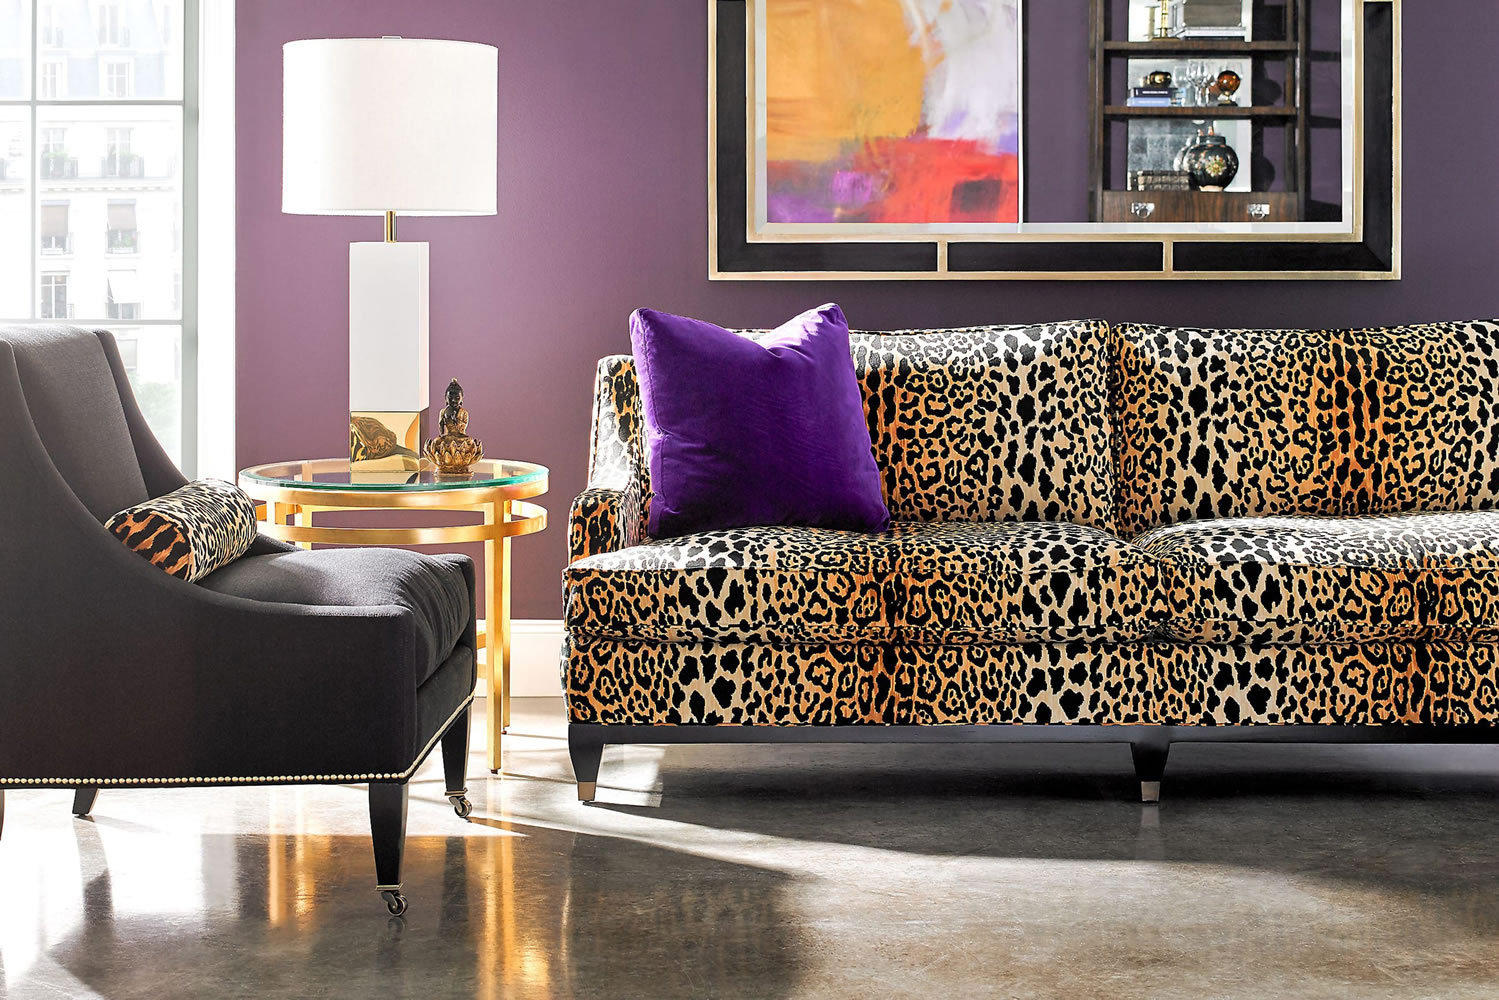 The Drake sofa by Lillian August for Hickory White in a bold leopard print.